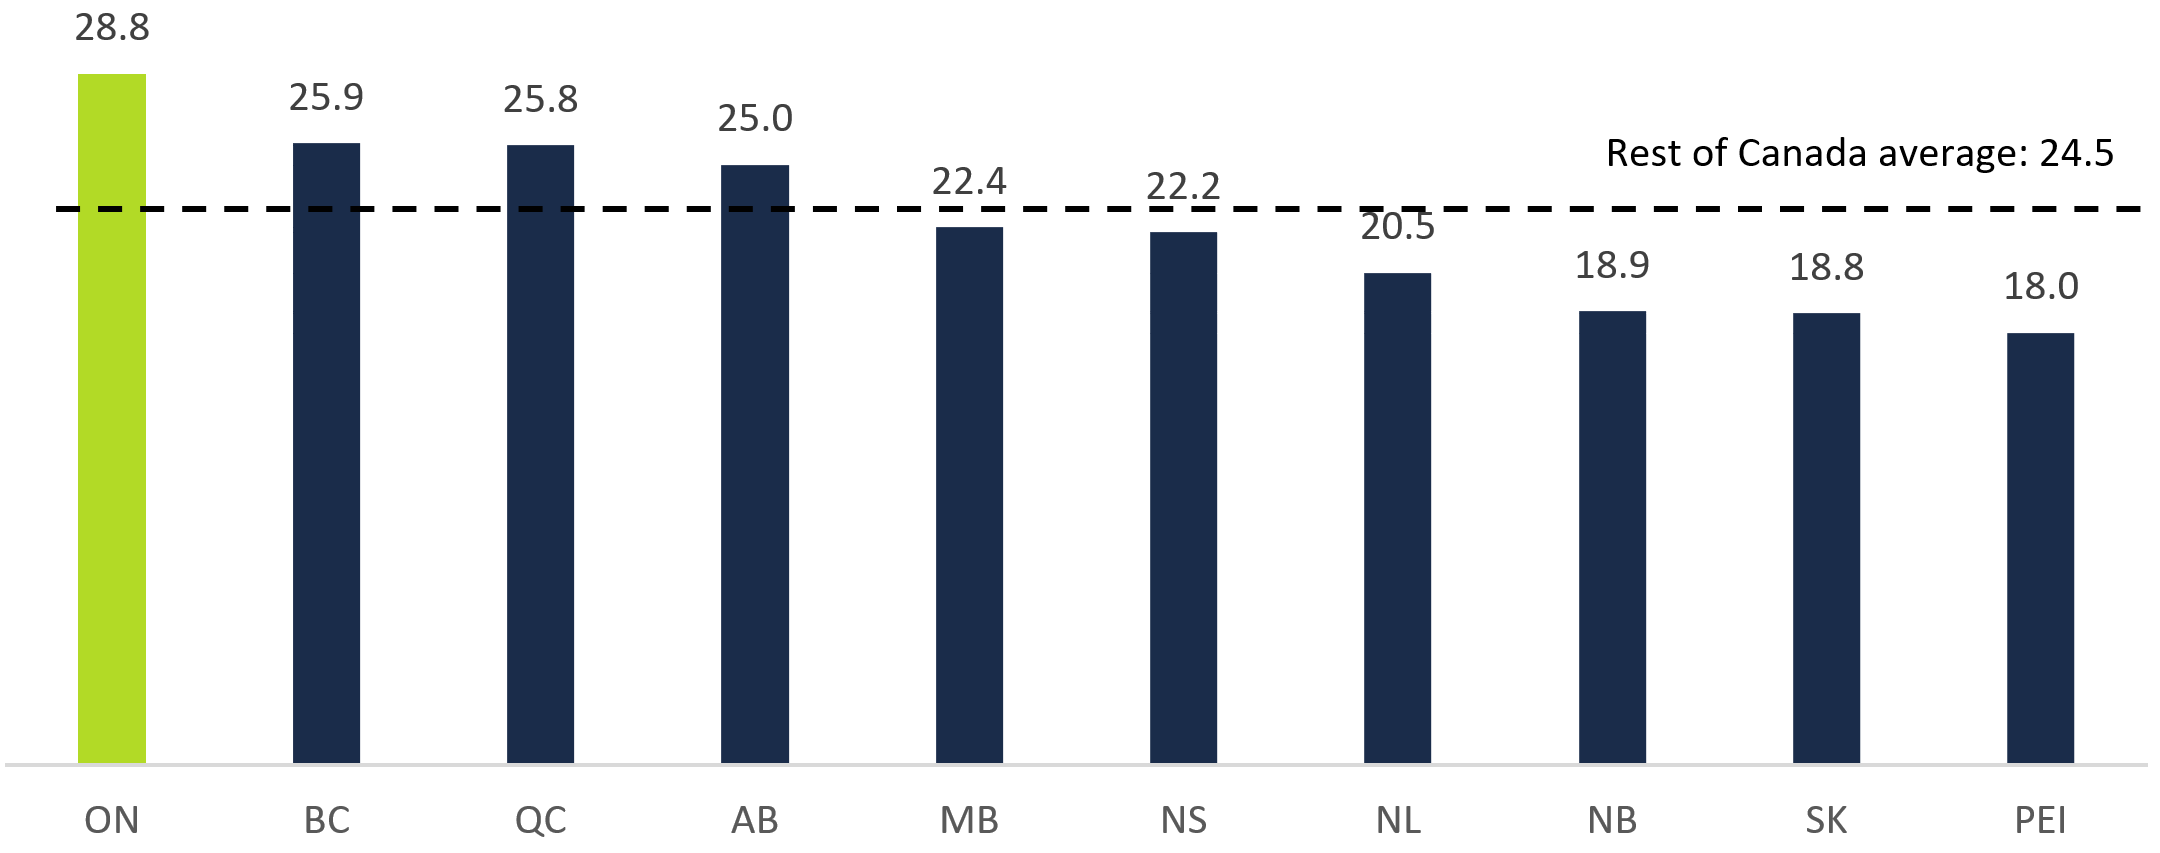 This chart shows the average commute time to work by province in 2016 in minutes. The chart shows that the average commute time to work was 28.8 minutes in Ontario, 25.9 minutes in British Columbia, 25.8 minutes in Quebec, 25.0 minutes in Alberta, 22.4 minutes in Manitoba, 22.2 minutes in Nova Scotia, 20.5 minutes in Newfoundland and Labrador, 18.9 minutes in New Brunswick, 18.8 minutes in Saskatchewan and 18.0 minutes in Prince Edward Island. This chart highlights that the average commute time to work across Canada excluding Ontario was 24.5 minutes.